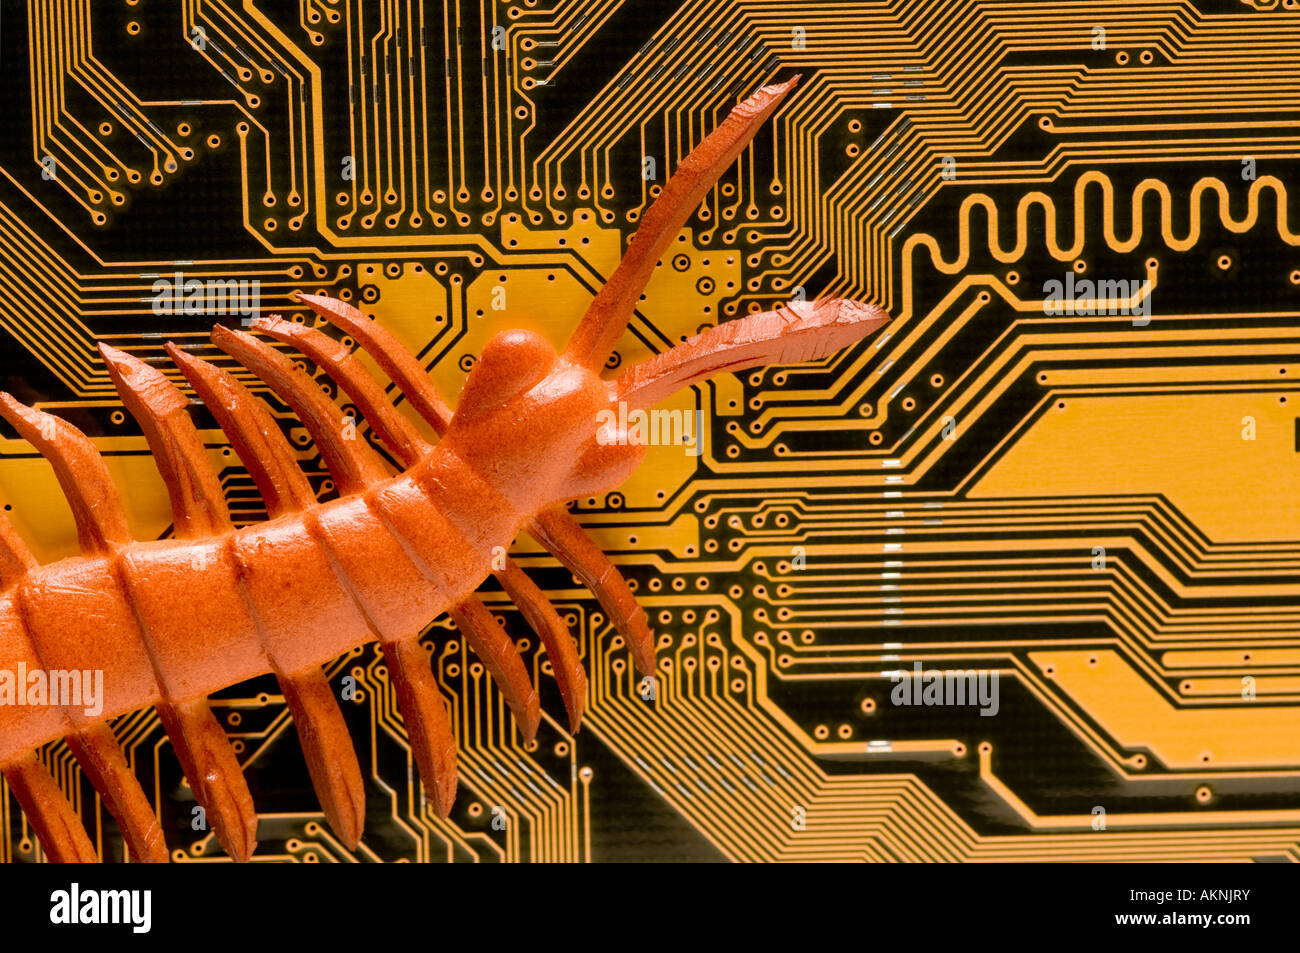 Digital close up photograph of a computer circuit board with a bug crawling over it Stock Photo